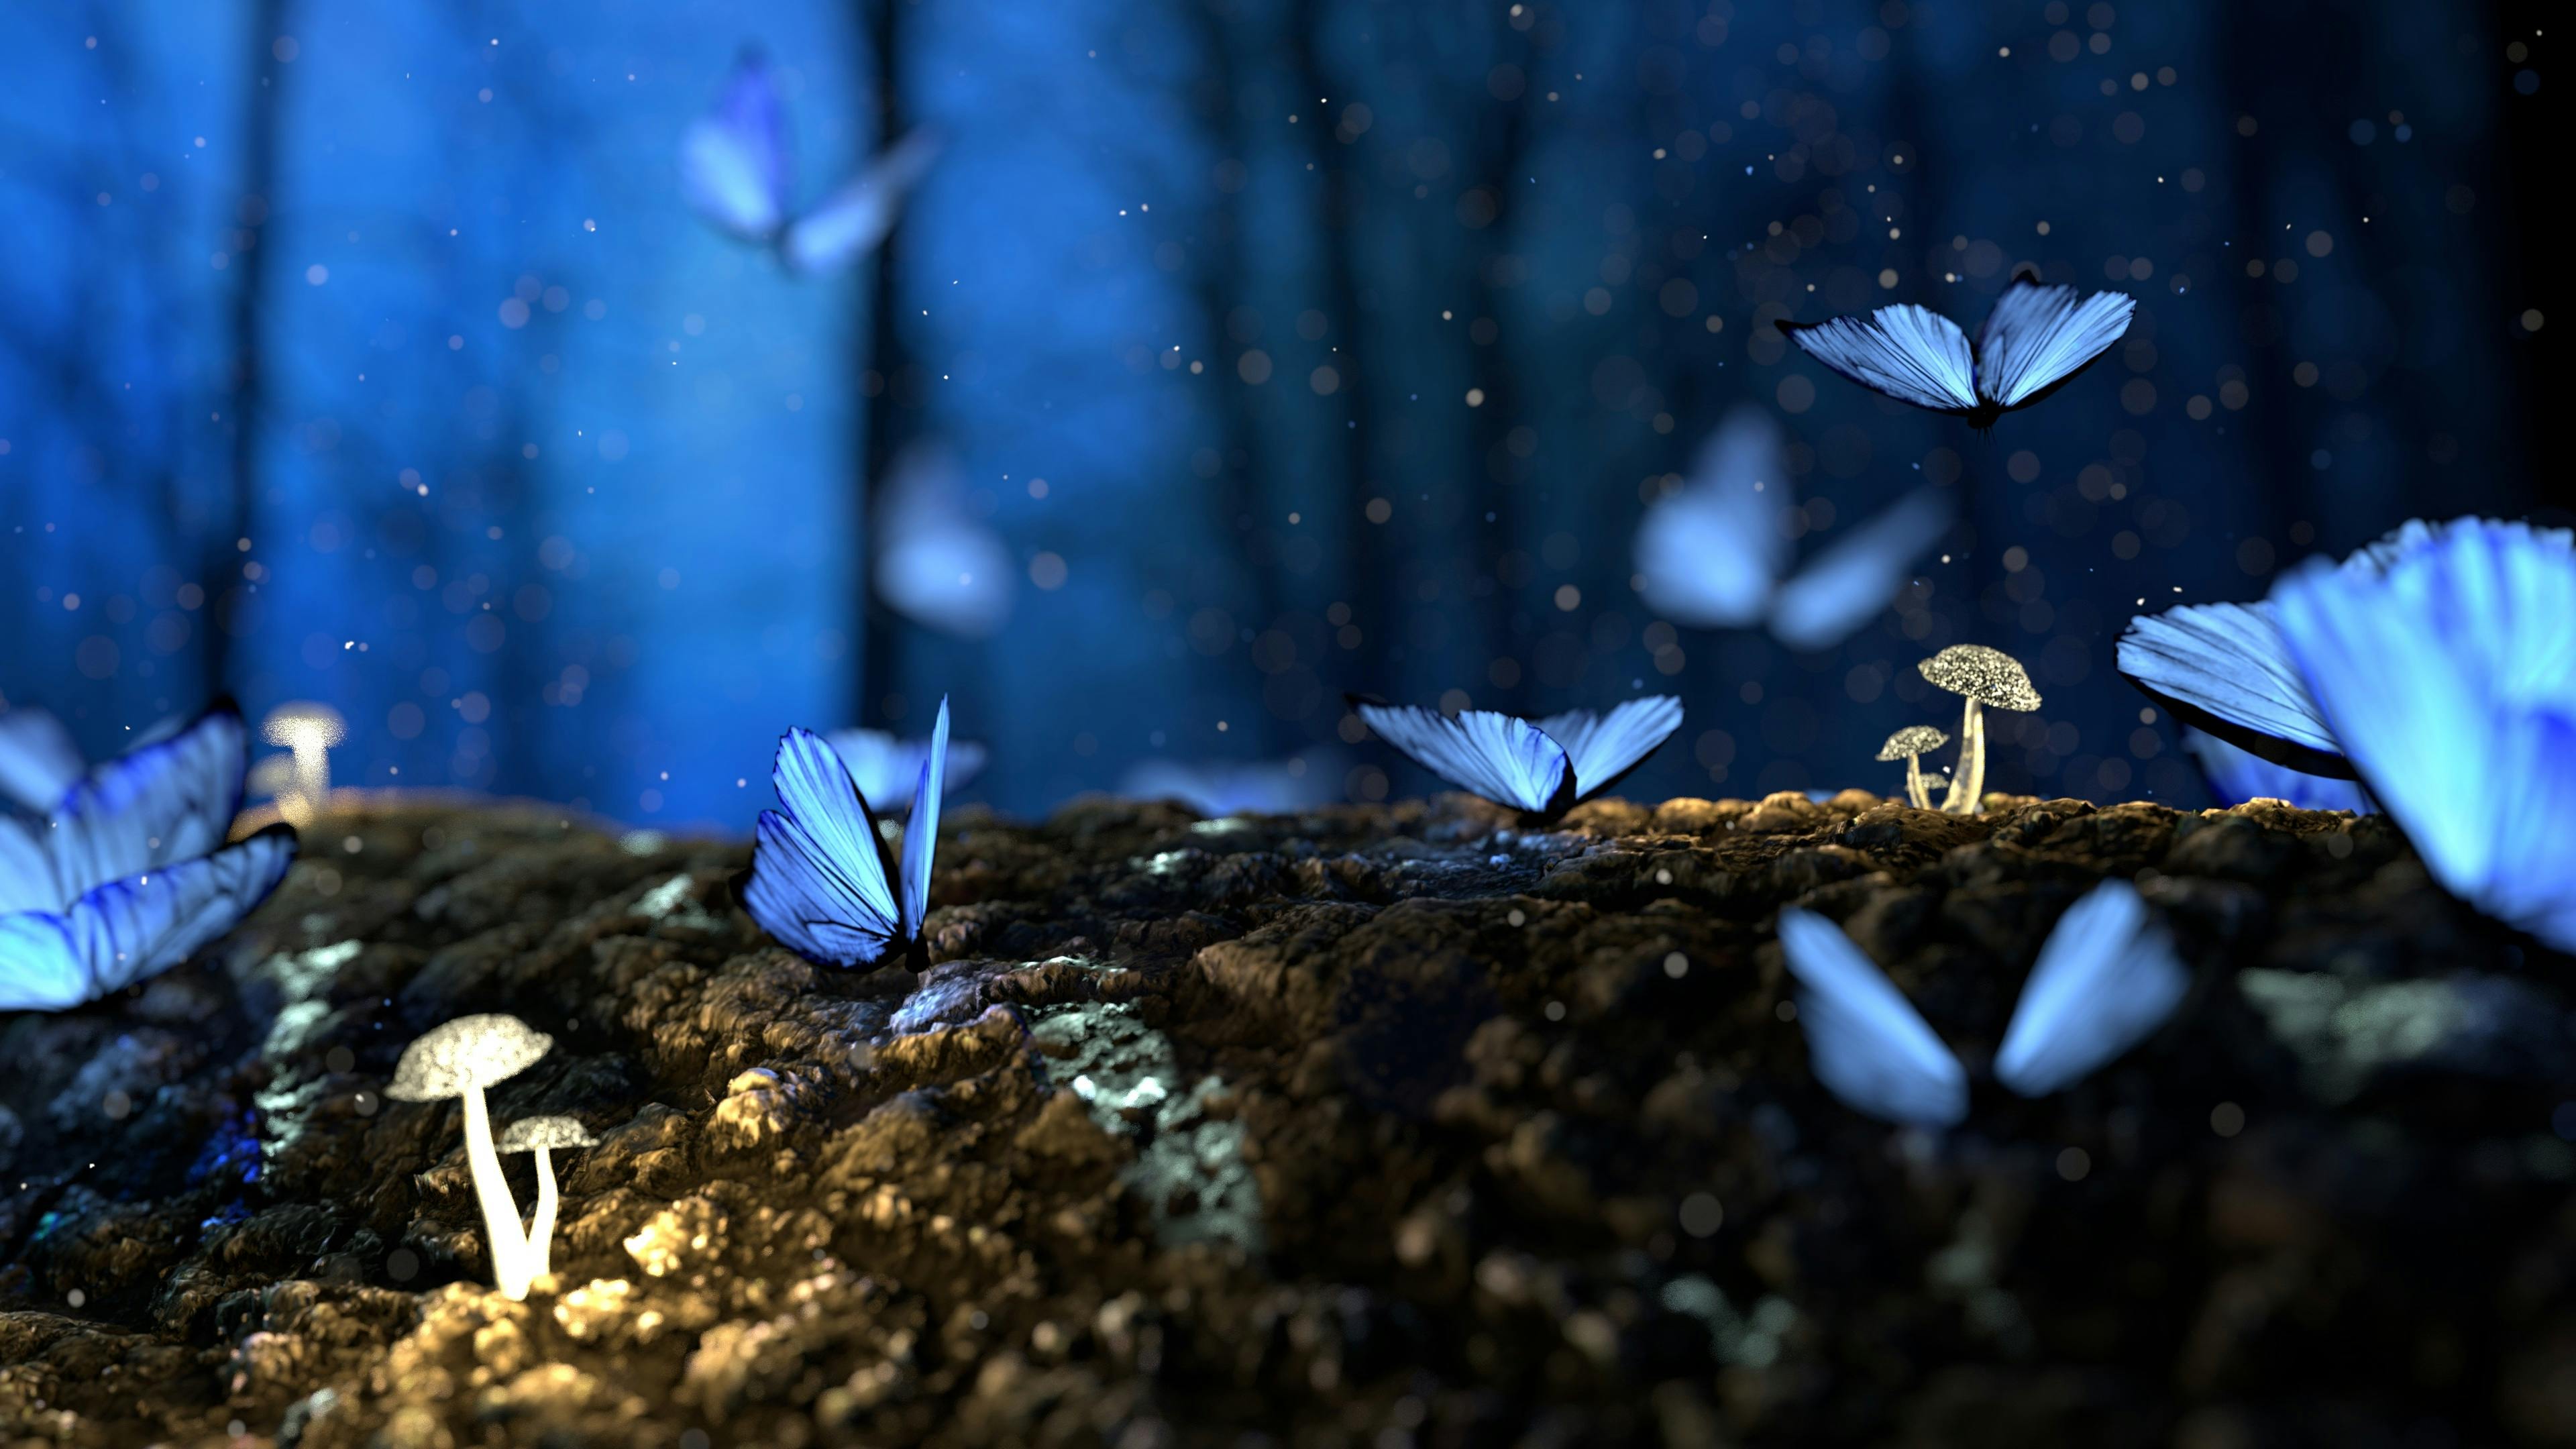 Aesthetic Blue Butterfly Wallpapers  Wallpaper Cave